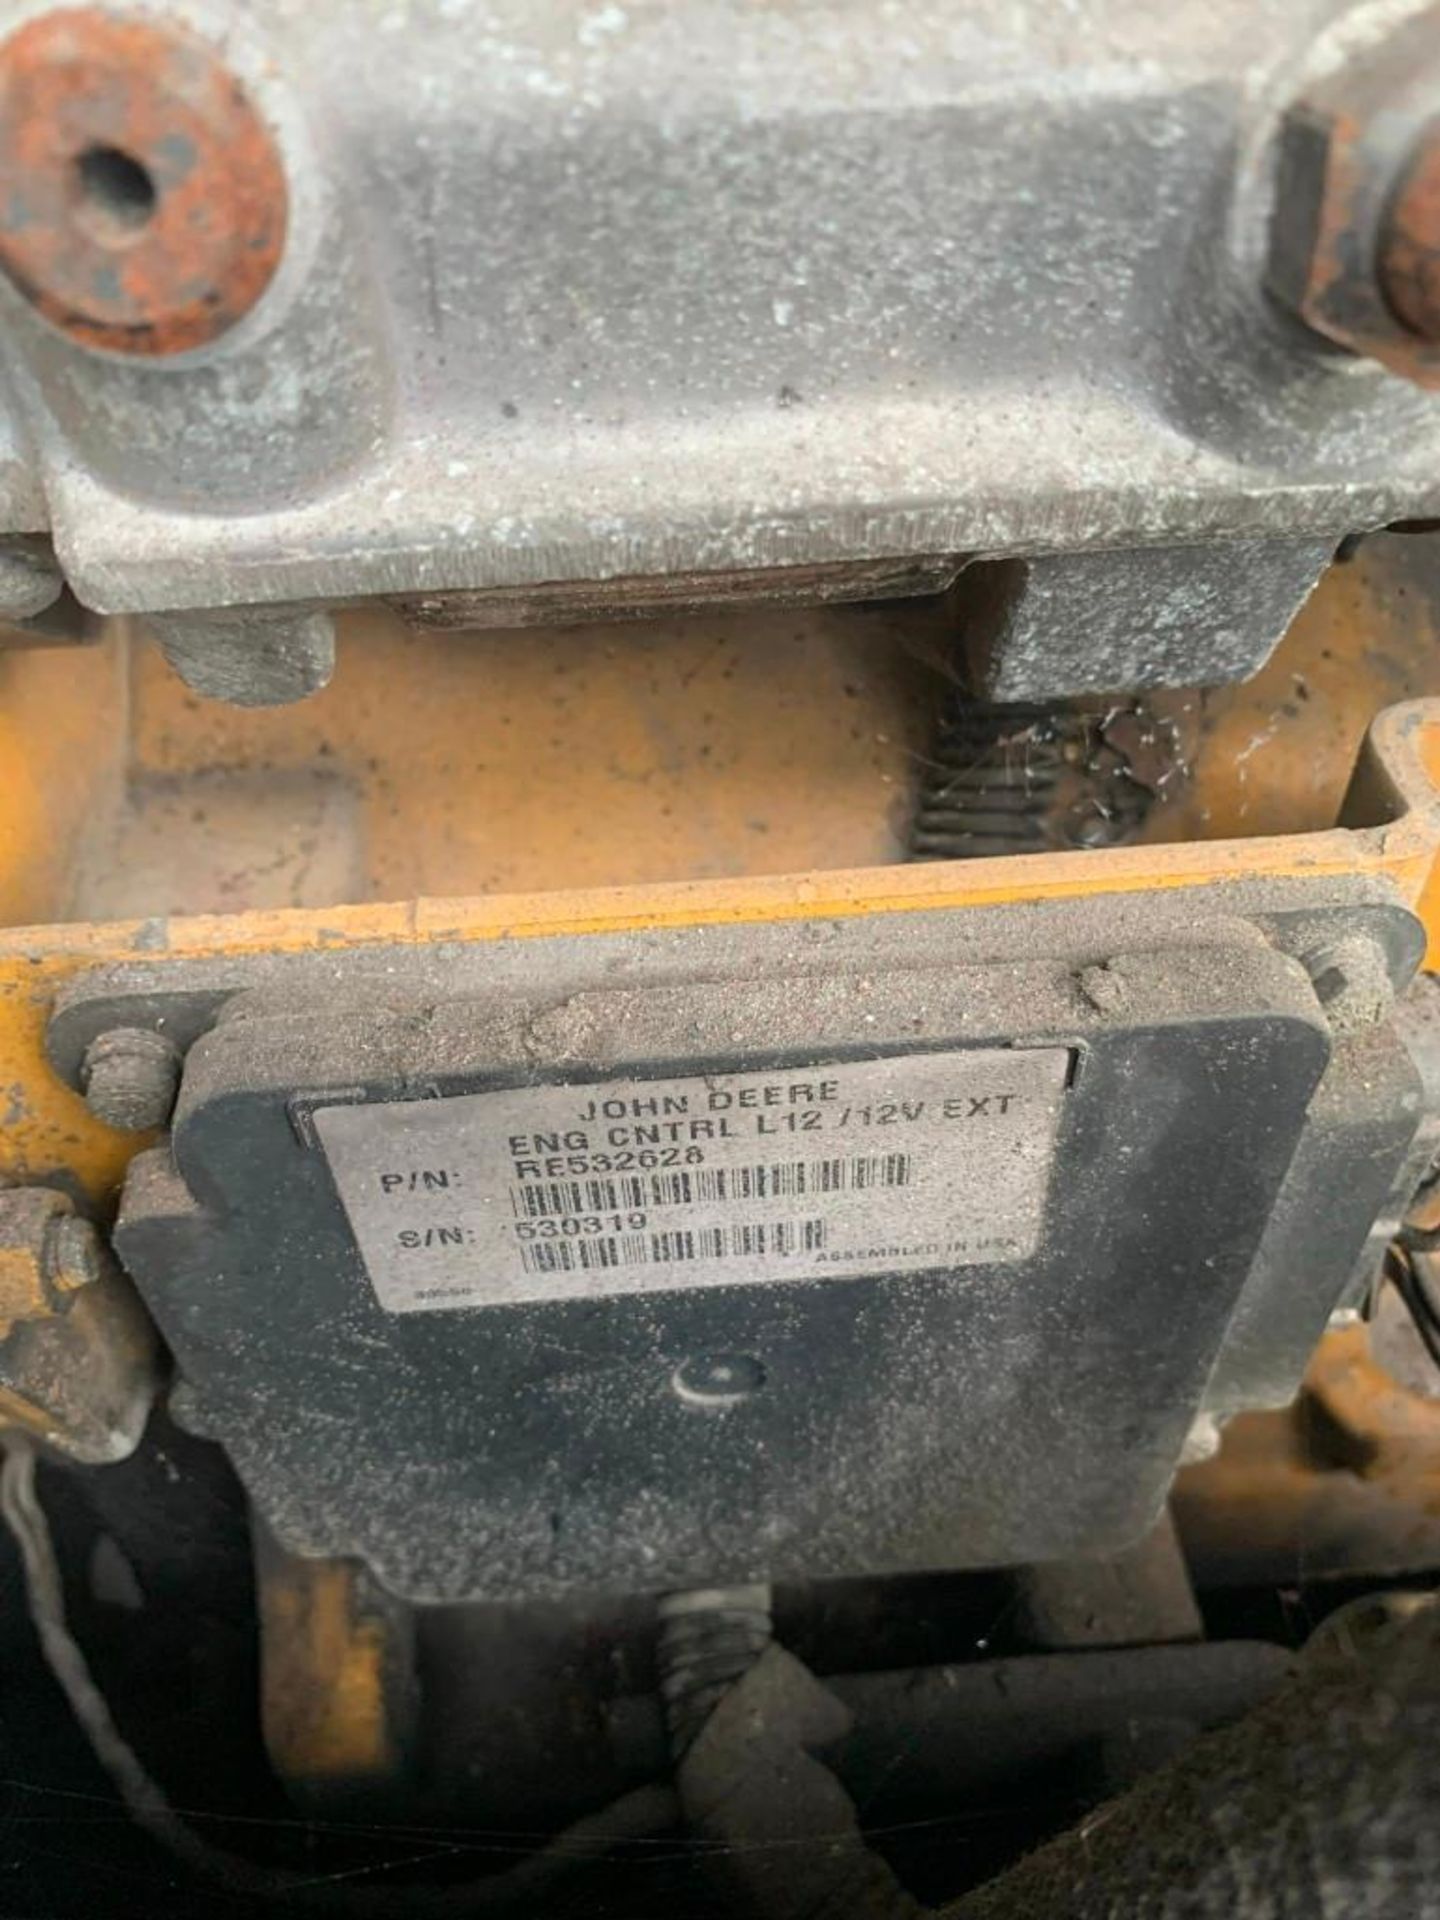 SULLAIR 375 AIR COMPRESSOR, DIESEL, JOHN DEERE ENGINE, TOW BEHIND, BILL OF SALE ONLY , CONDITION UNK - Image 8 of 12